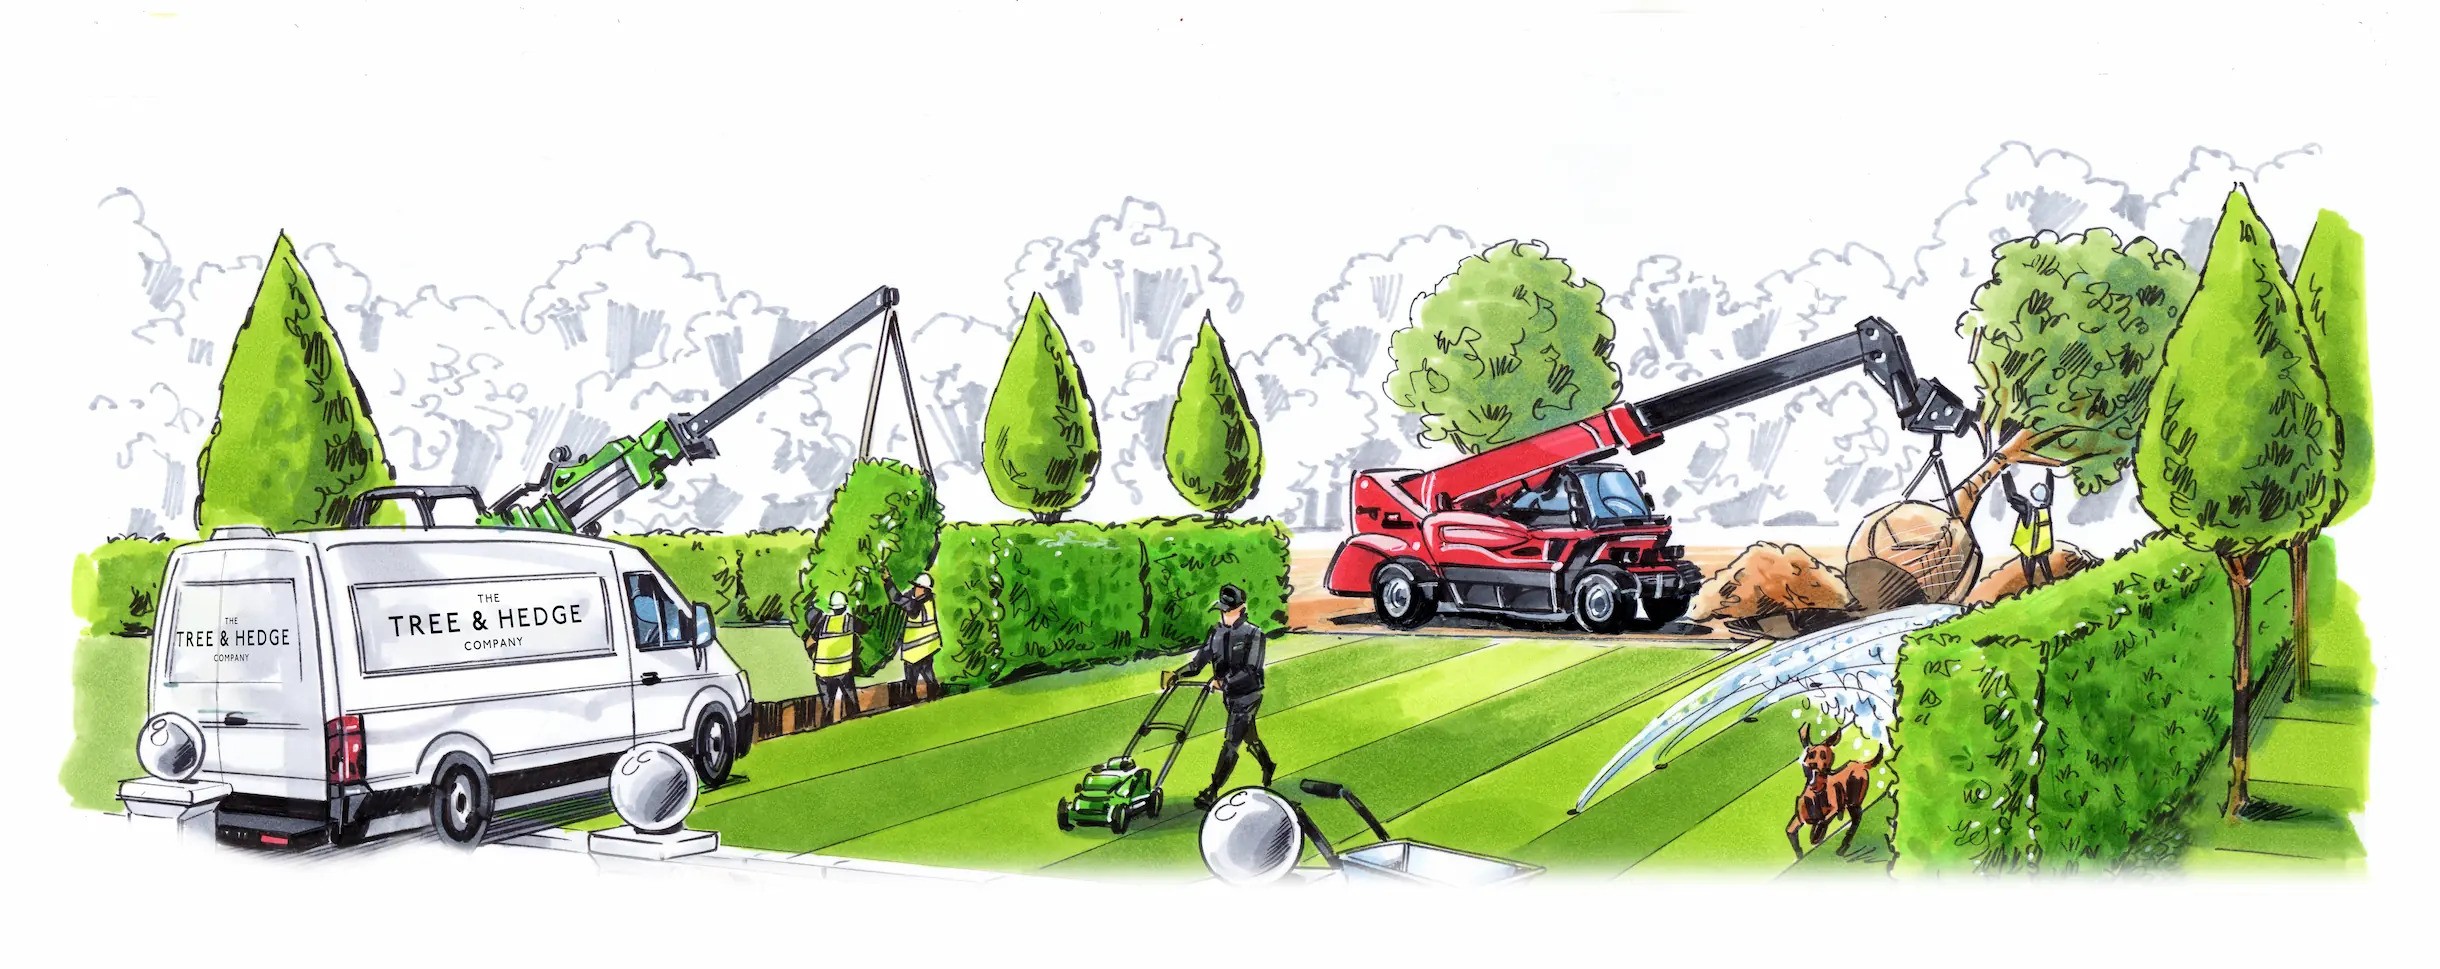 Tree planting services